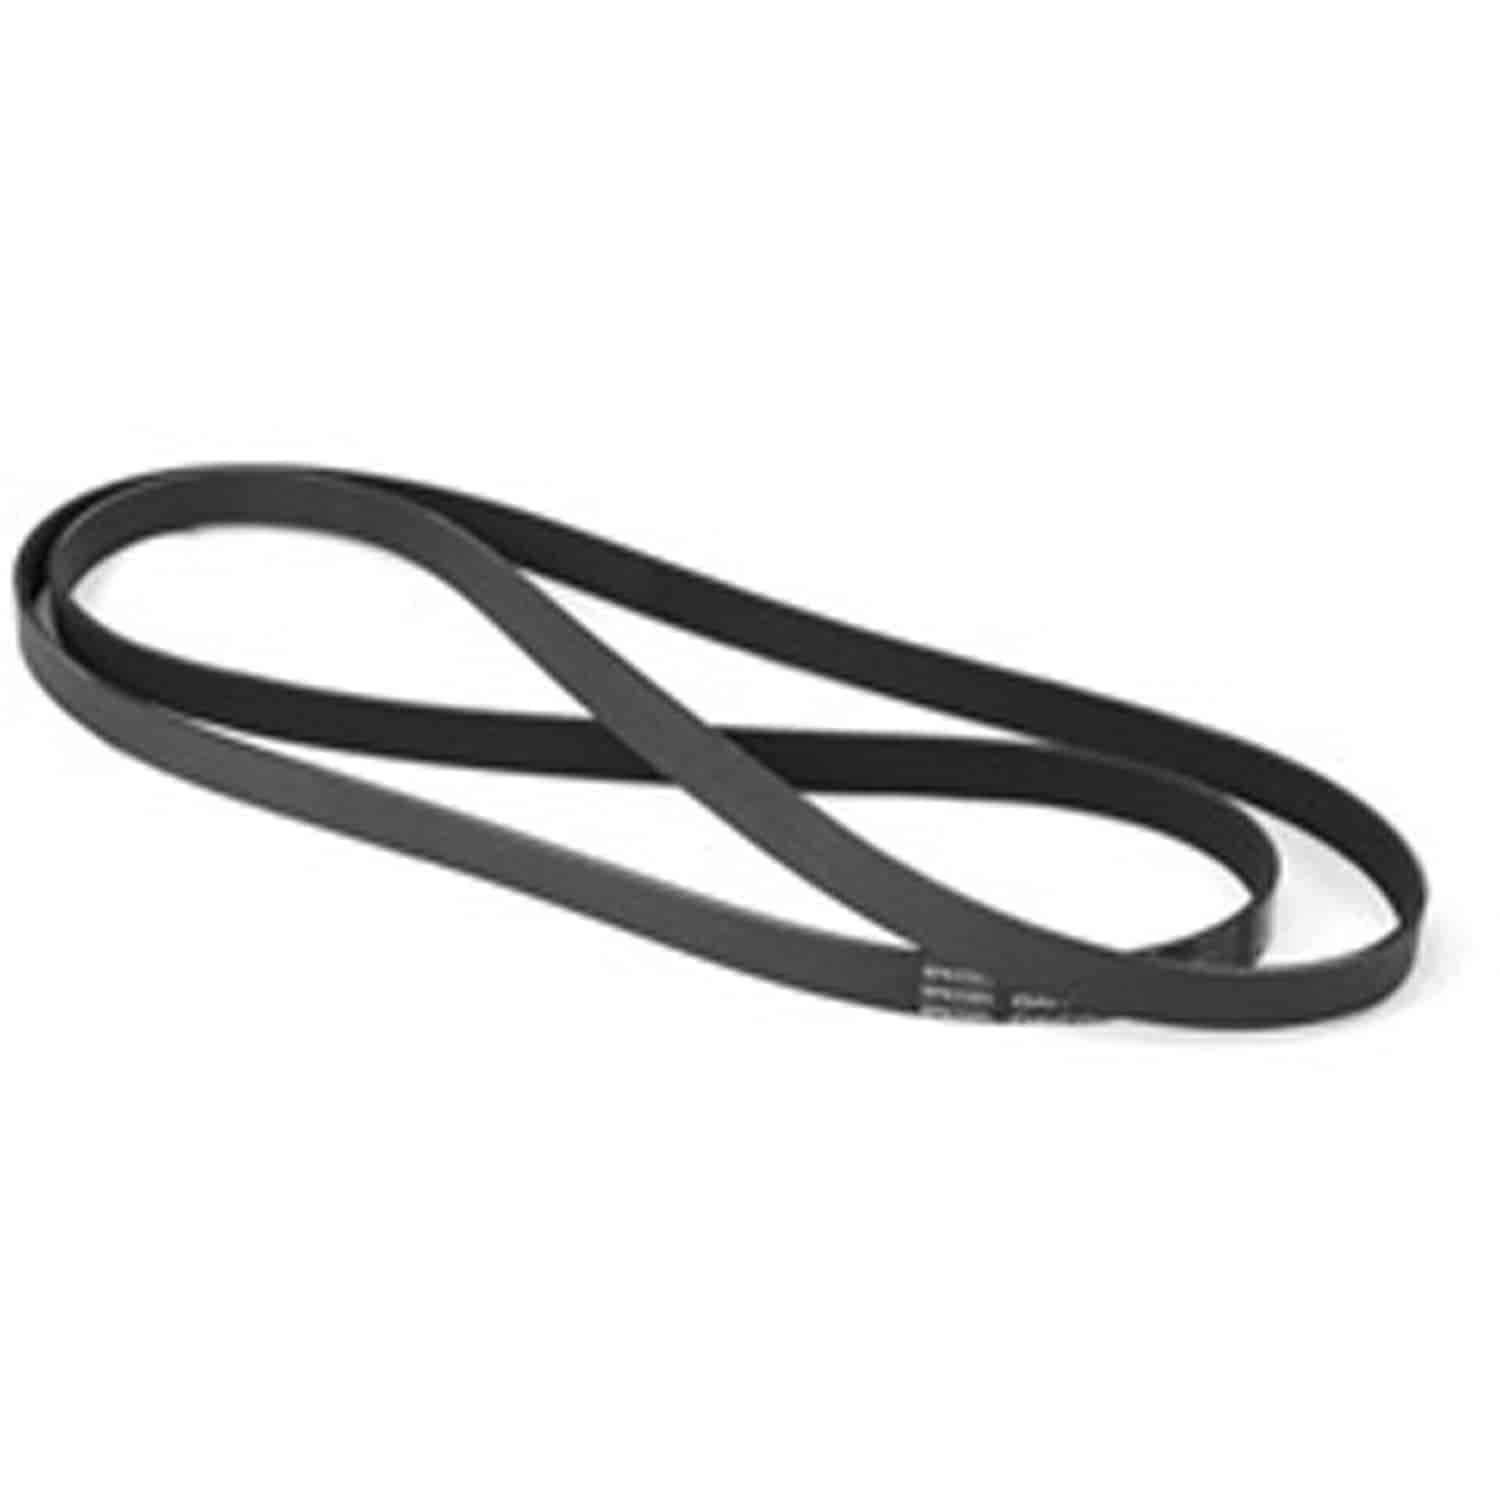 Stock replacement serpentine belt from Omix-ADA, Fits 81-82 Jeep CJ5 and CJ7 with a 4.2L engine